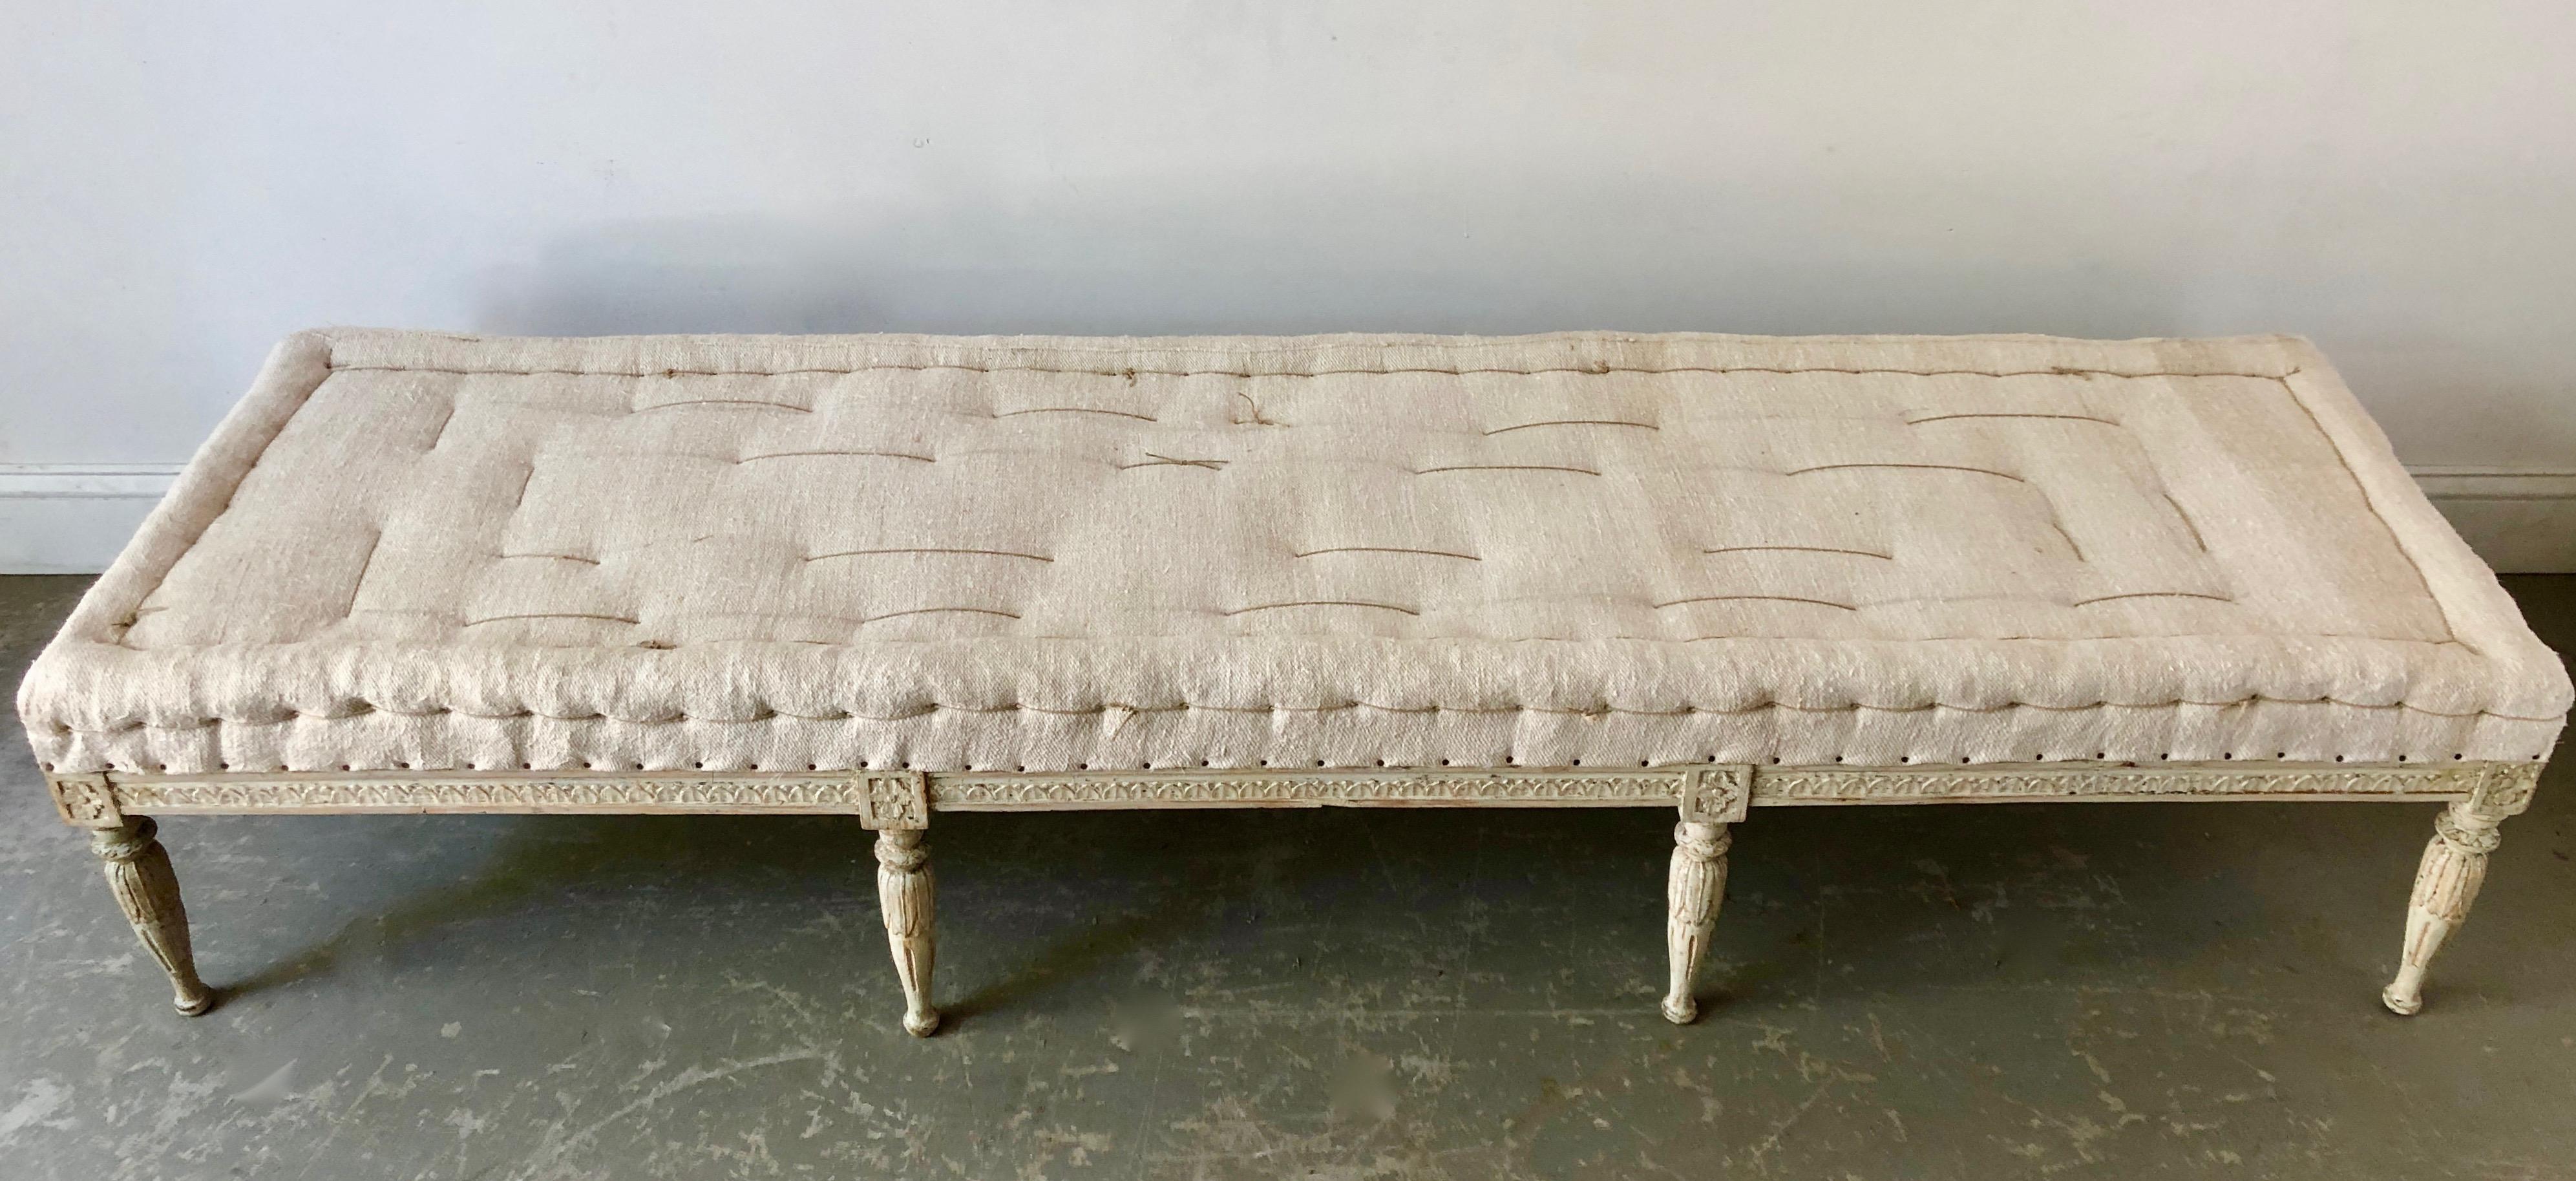 Very rare. Swedish Gustavian period bench, circa 1810, finished on all four sides with Guilloché carvings on carved round fluted legs. Scraped to original cream /white finish and upholstered in traditional way in antique handstitched linen. Timeless